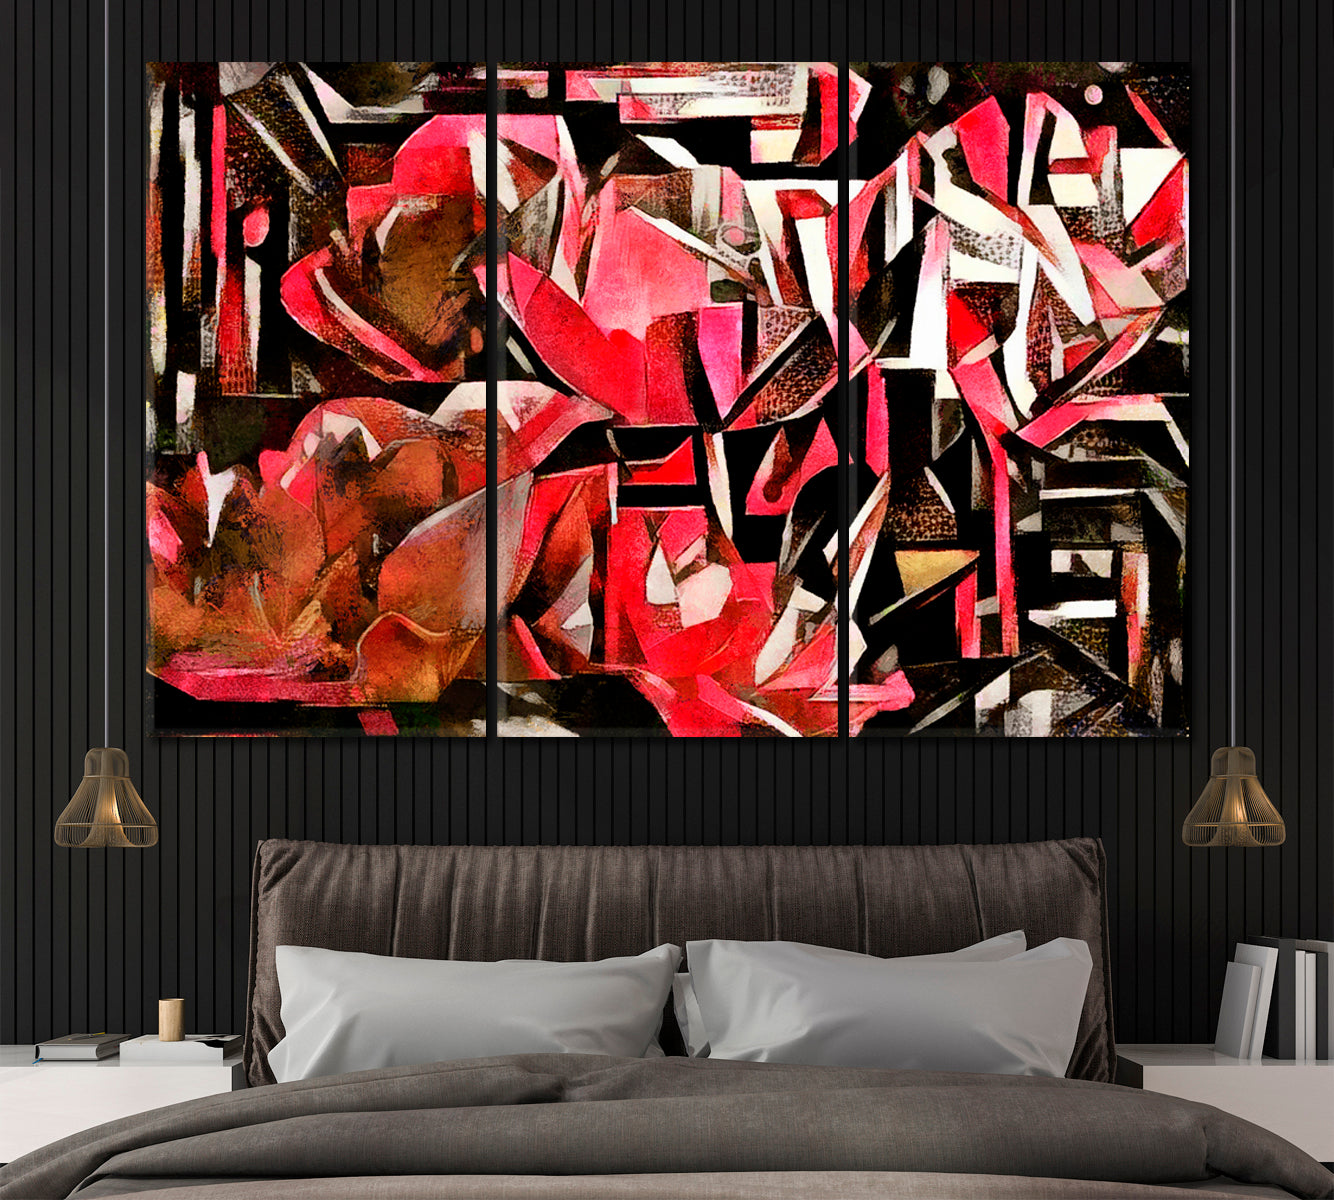 Peonies in Cubism Style Canvas Print ArtLexy 3 Panels 36"x24" inches 